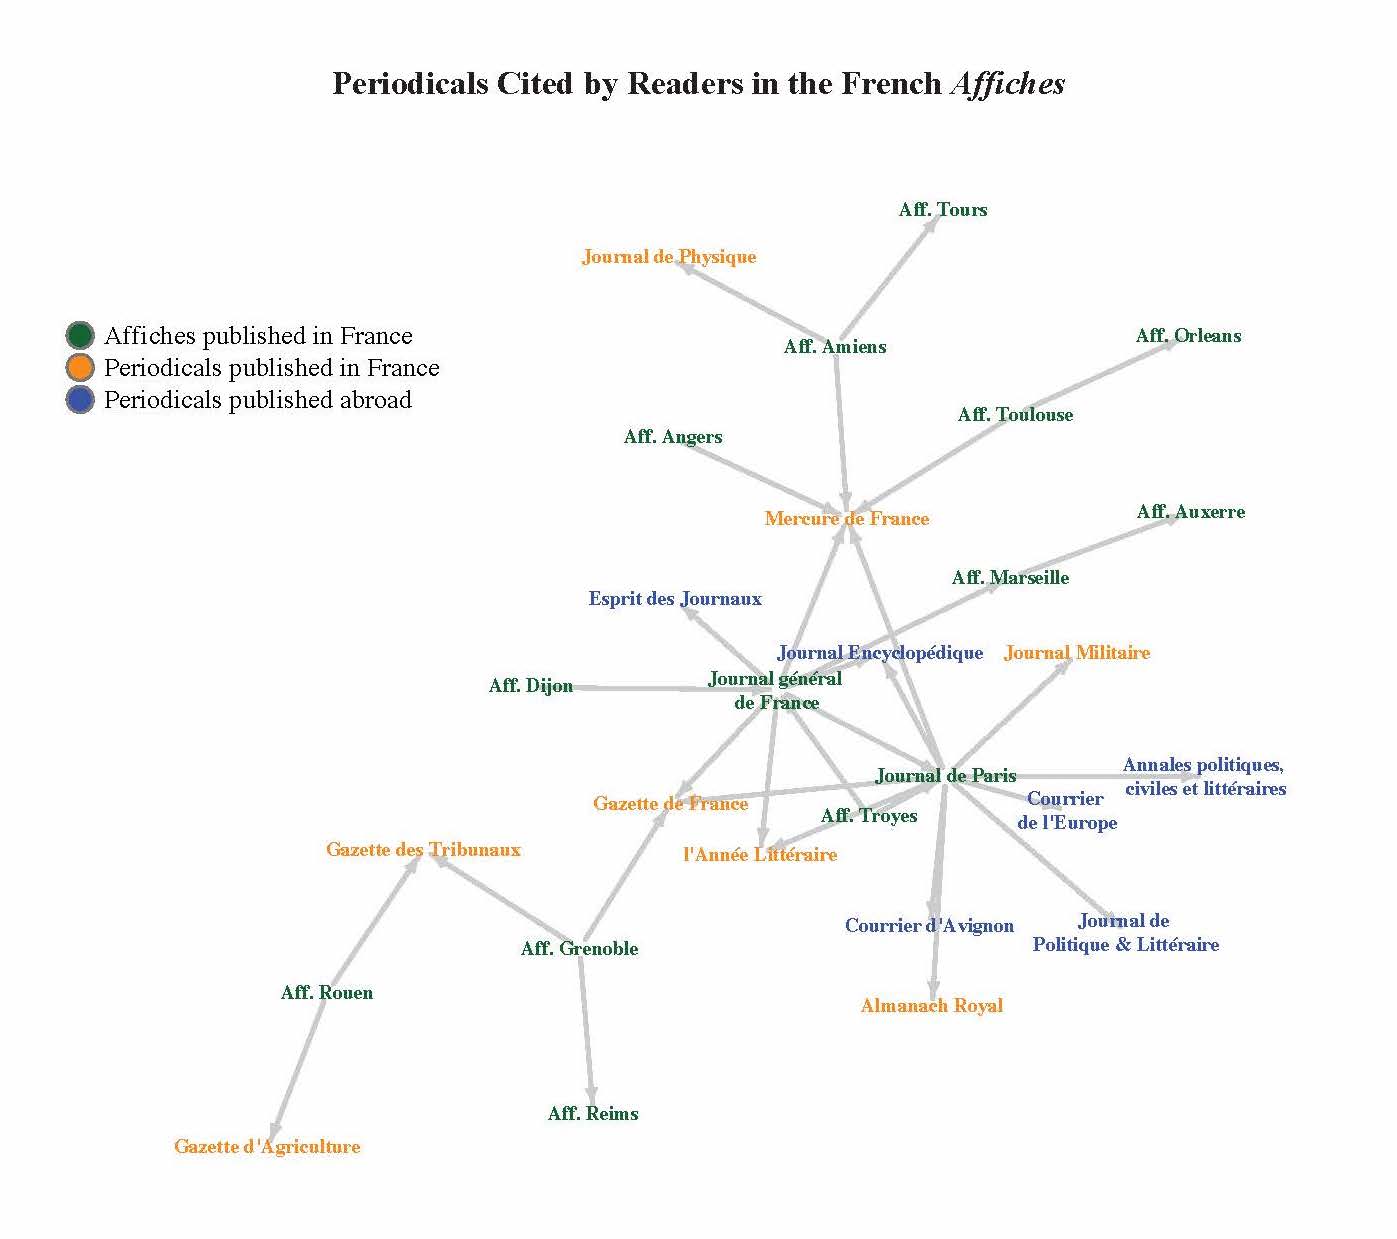 Network graph showing connections between affiches published in France, periodicals published in France, and periodicals published abroad.